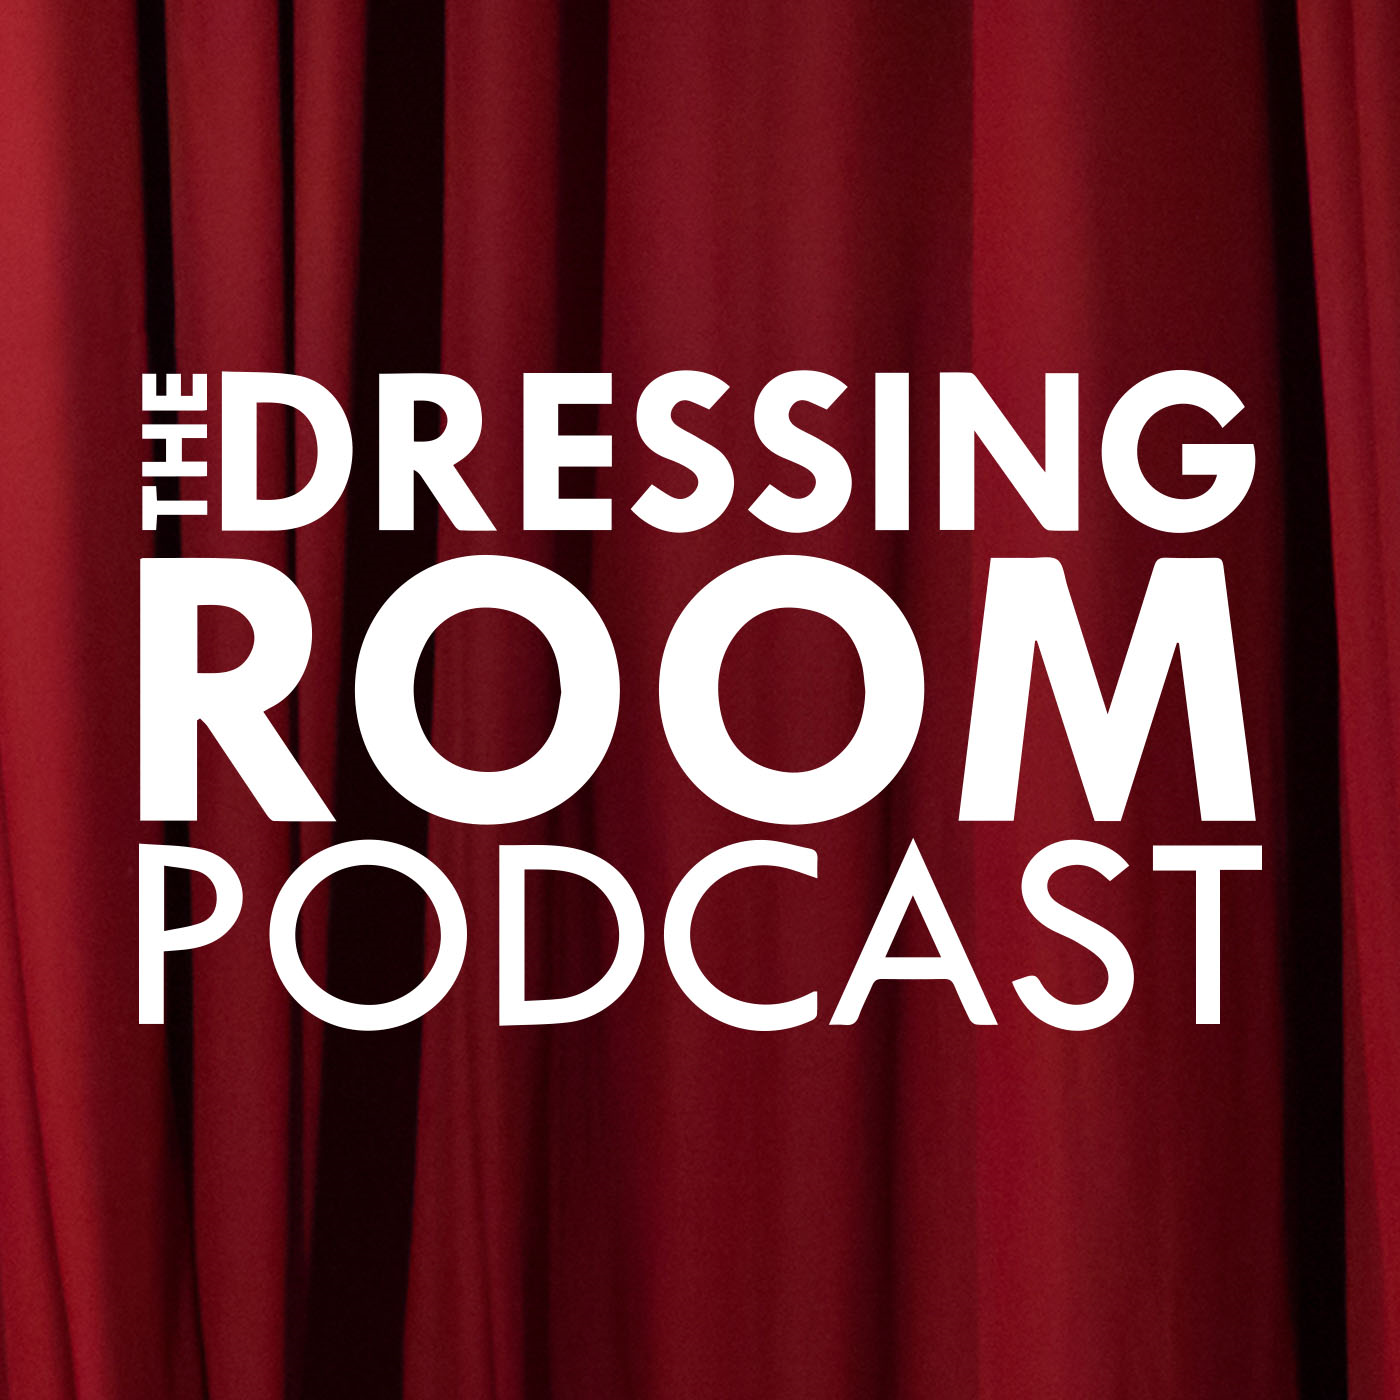 THE DRESSING ROOM PODCAST - EPISODE 4 - ROB MILLS